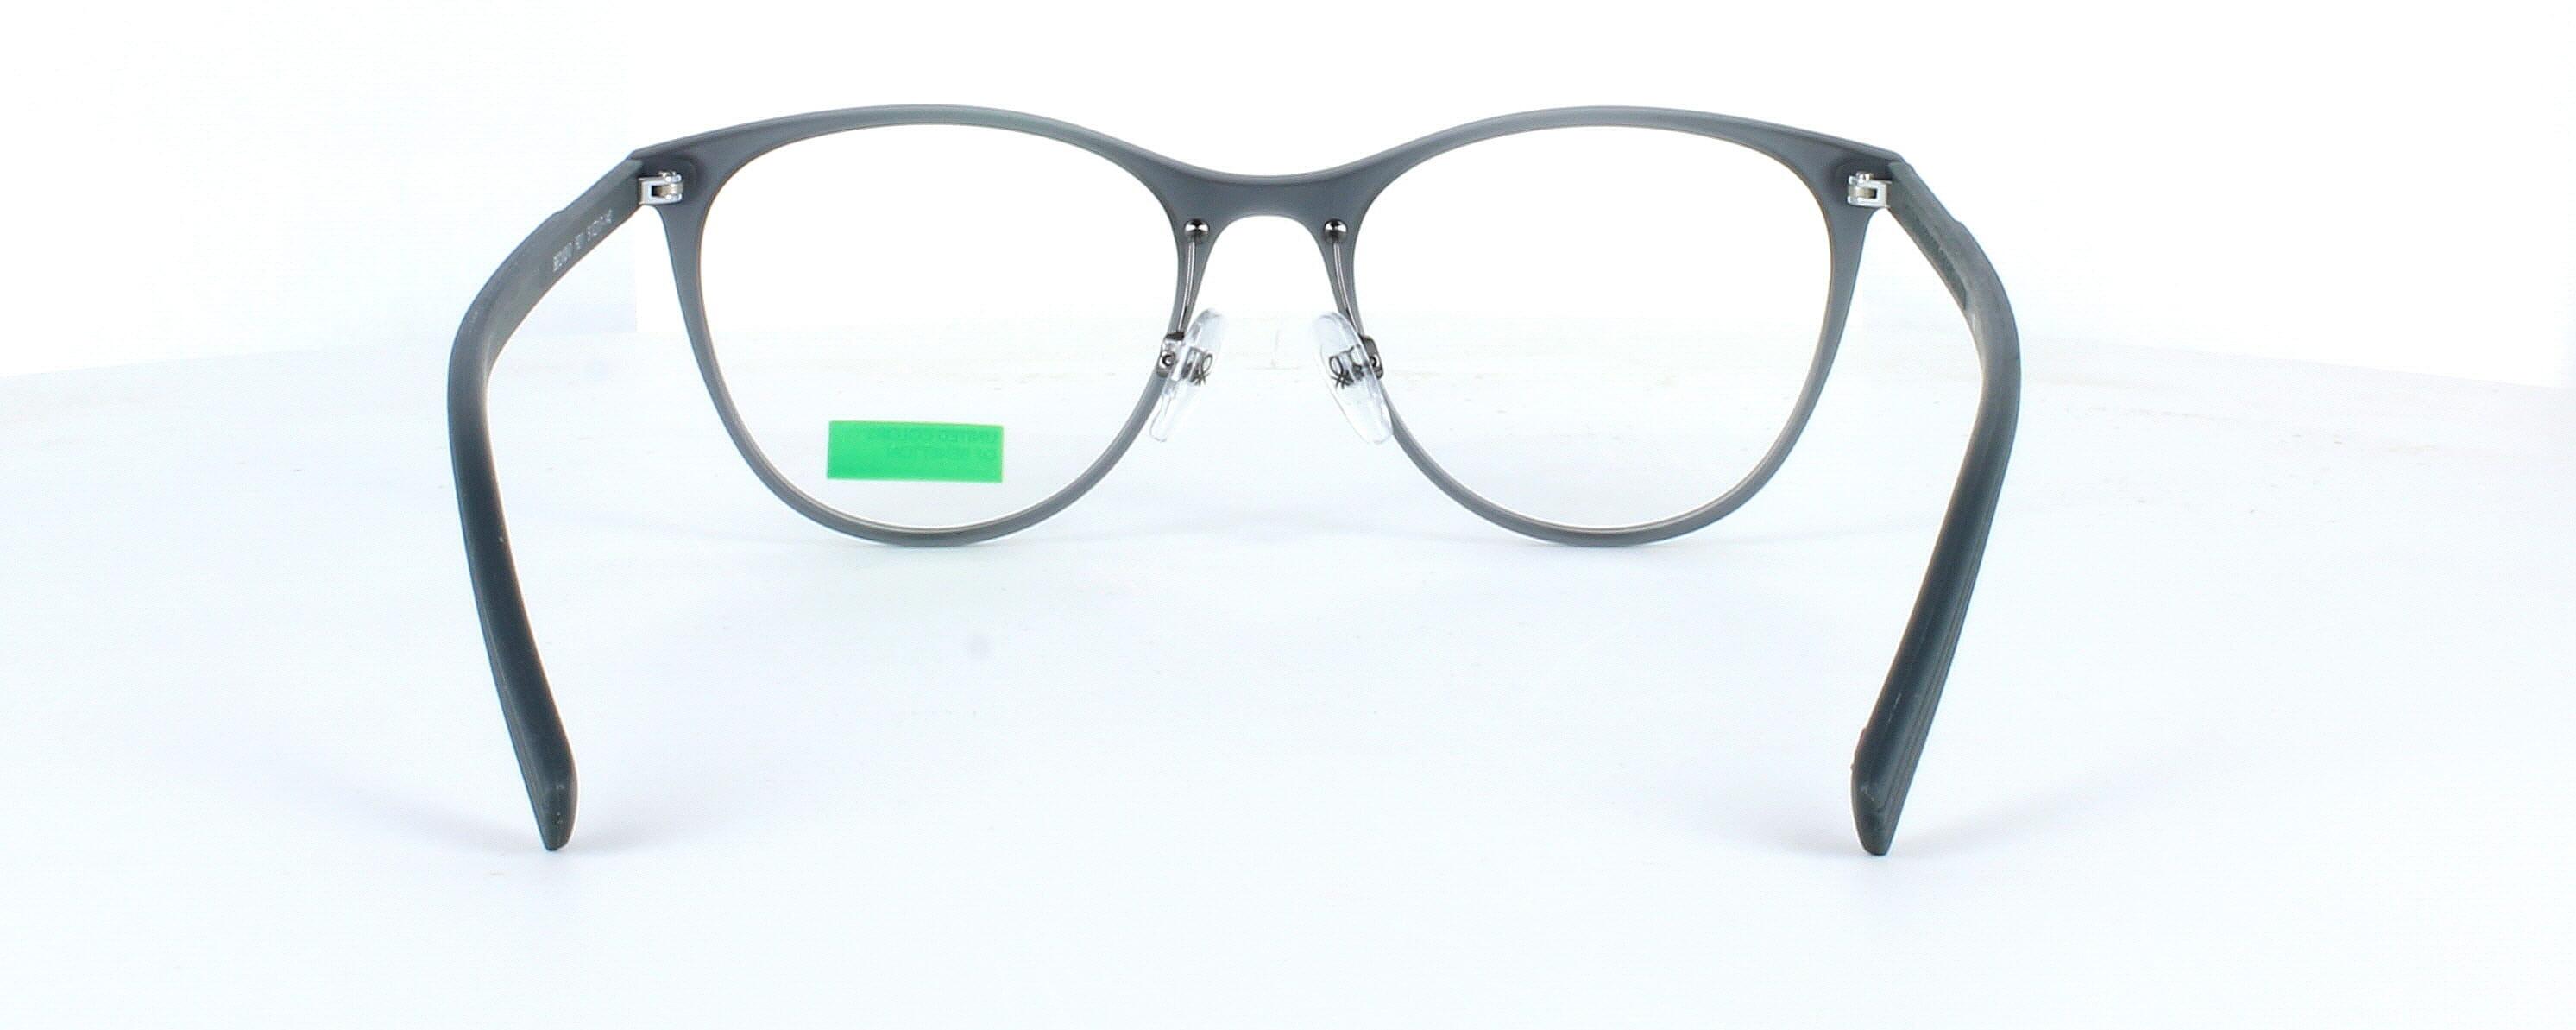 Benetton BEO1013 112 - Women's matt crystal grey round shaped TR90 lightweight plastic glasses frame with grey arms - image view 4